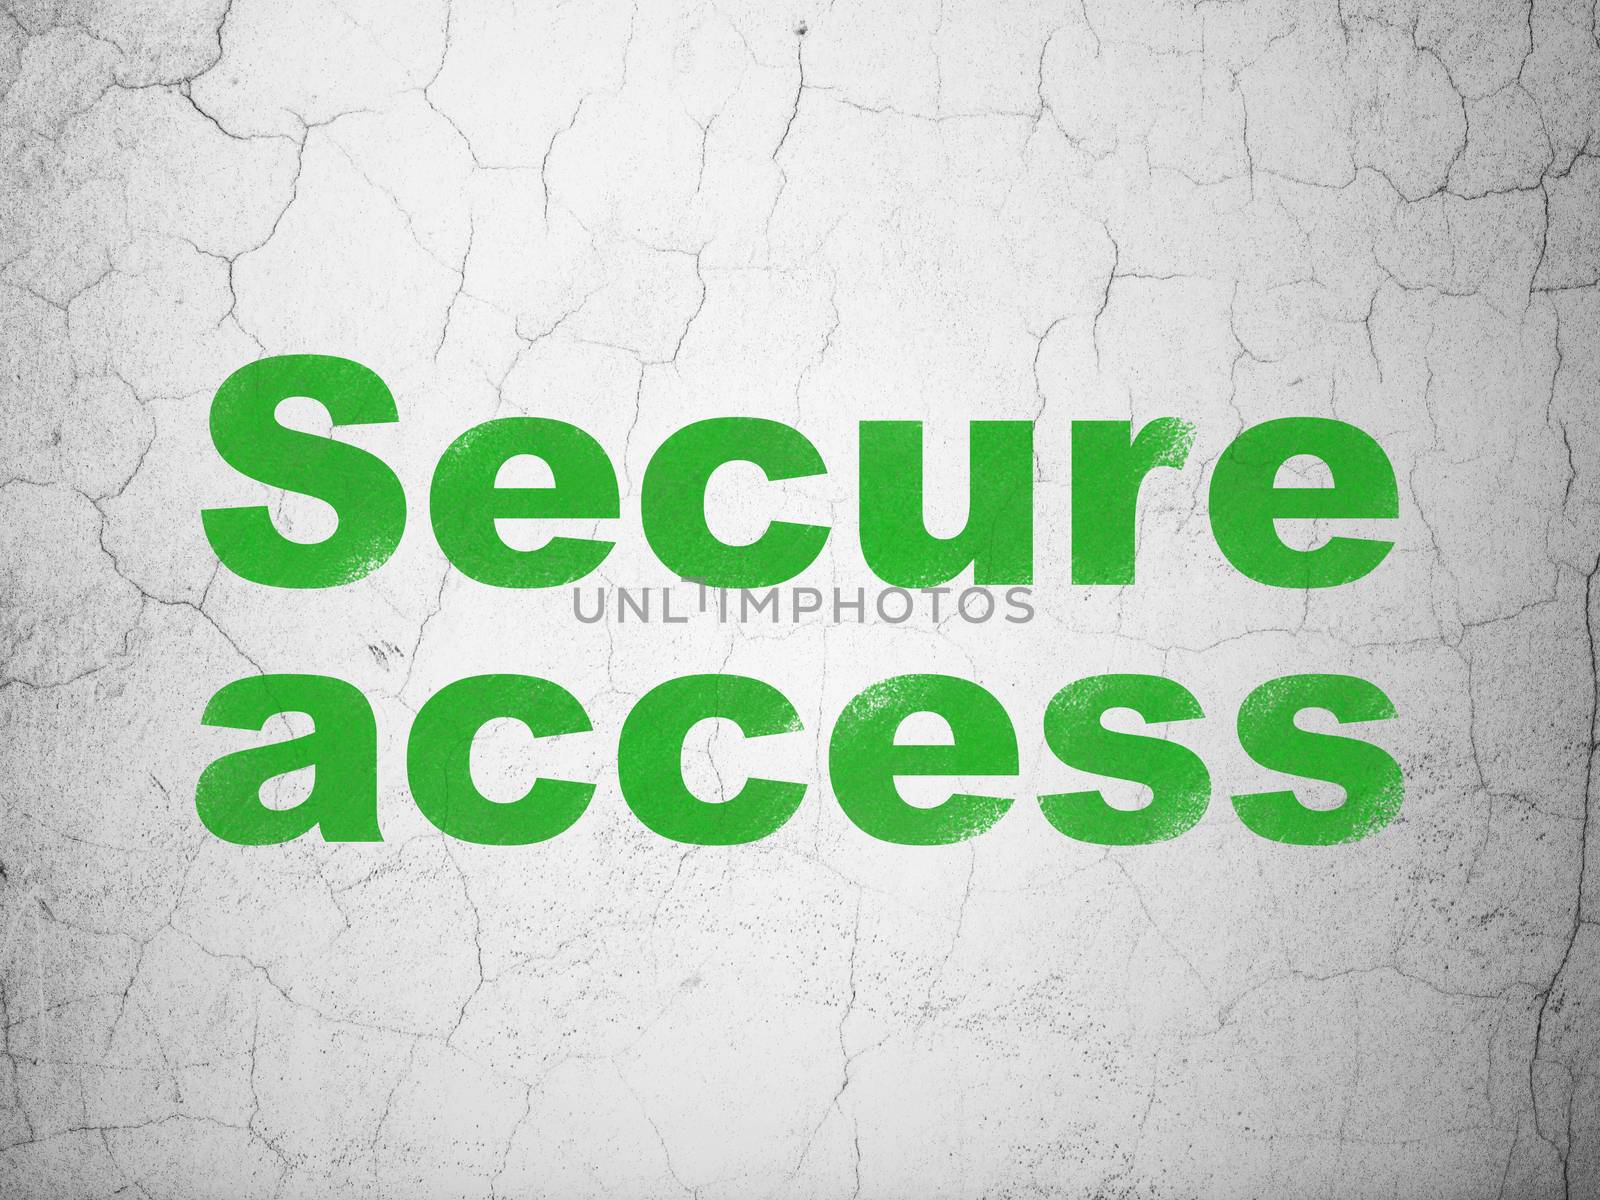 Security concept: Green Secure Access on textured concrete wall background